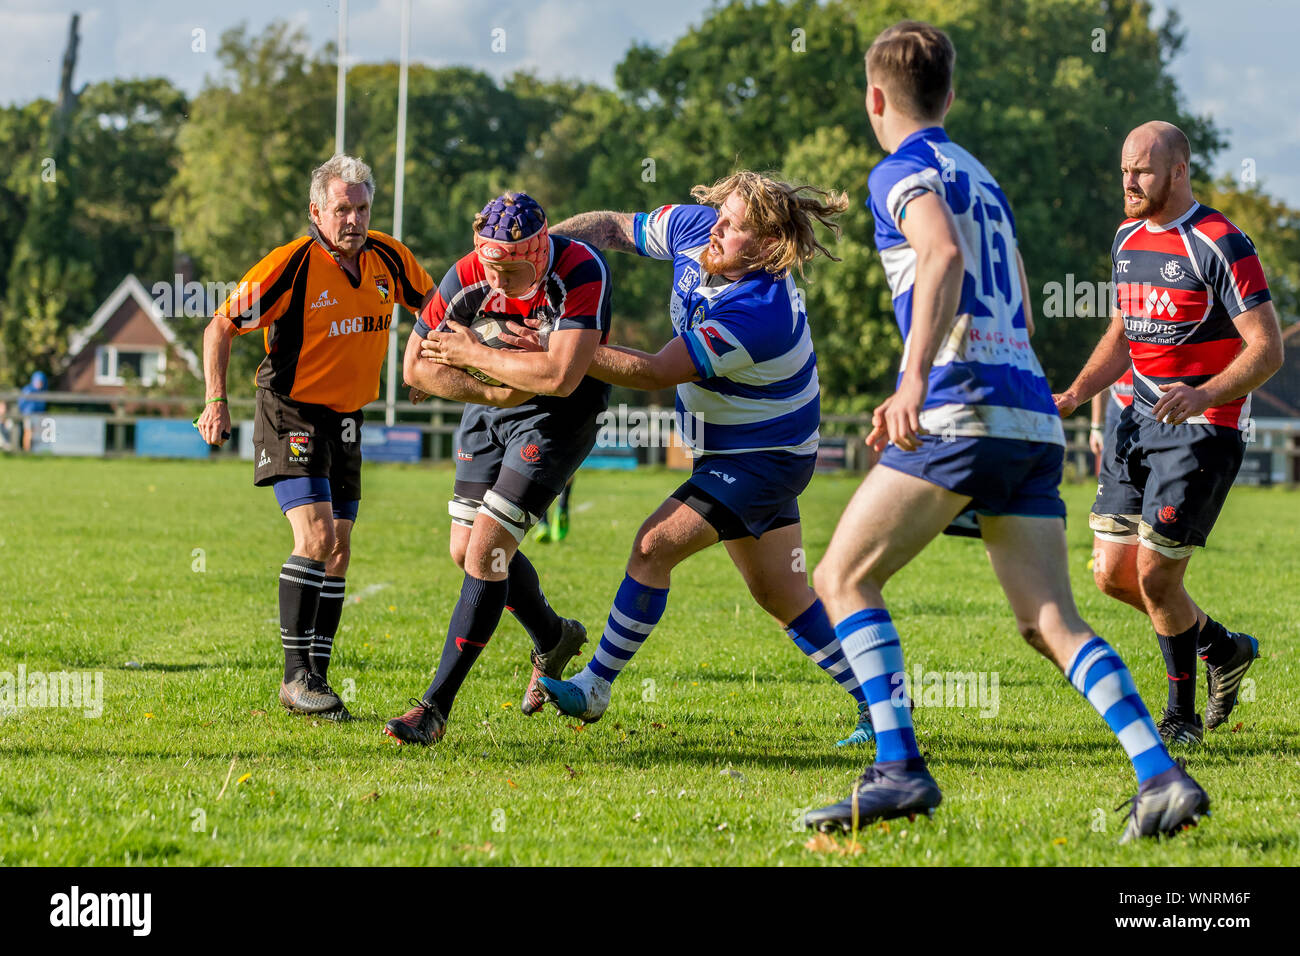 Amateur rugby players wrestle for the ball while team mates close in and the referee scans the tackle Stock Photo